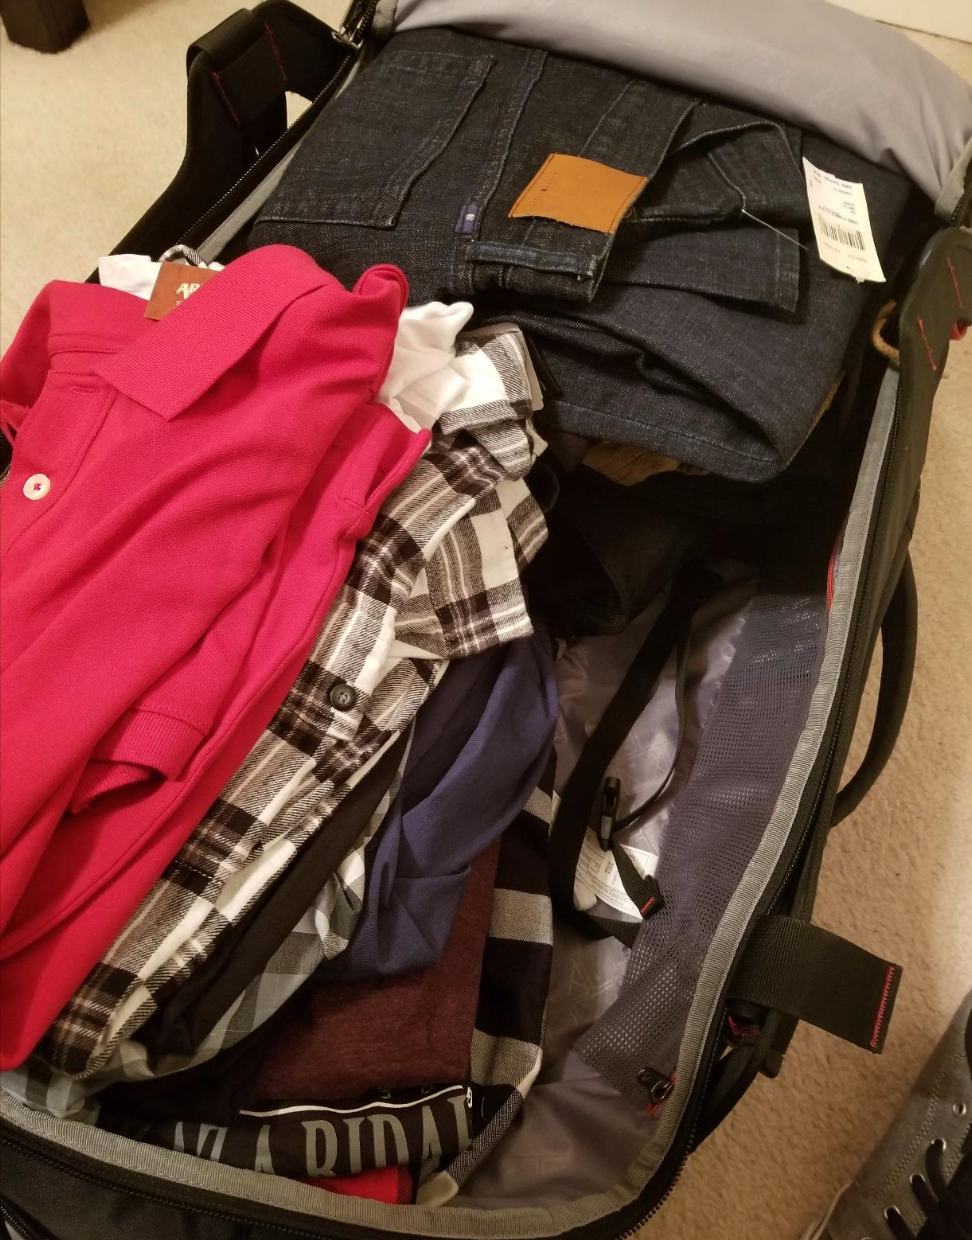 Where to Buy Travel Gear (That You Wouldn't Expect!) • Her Packing